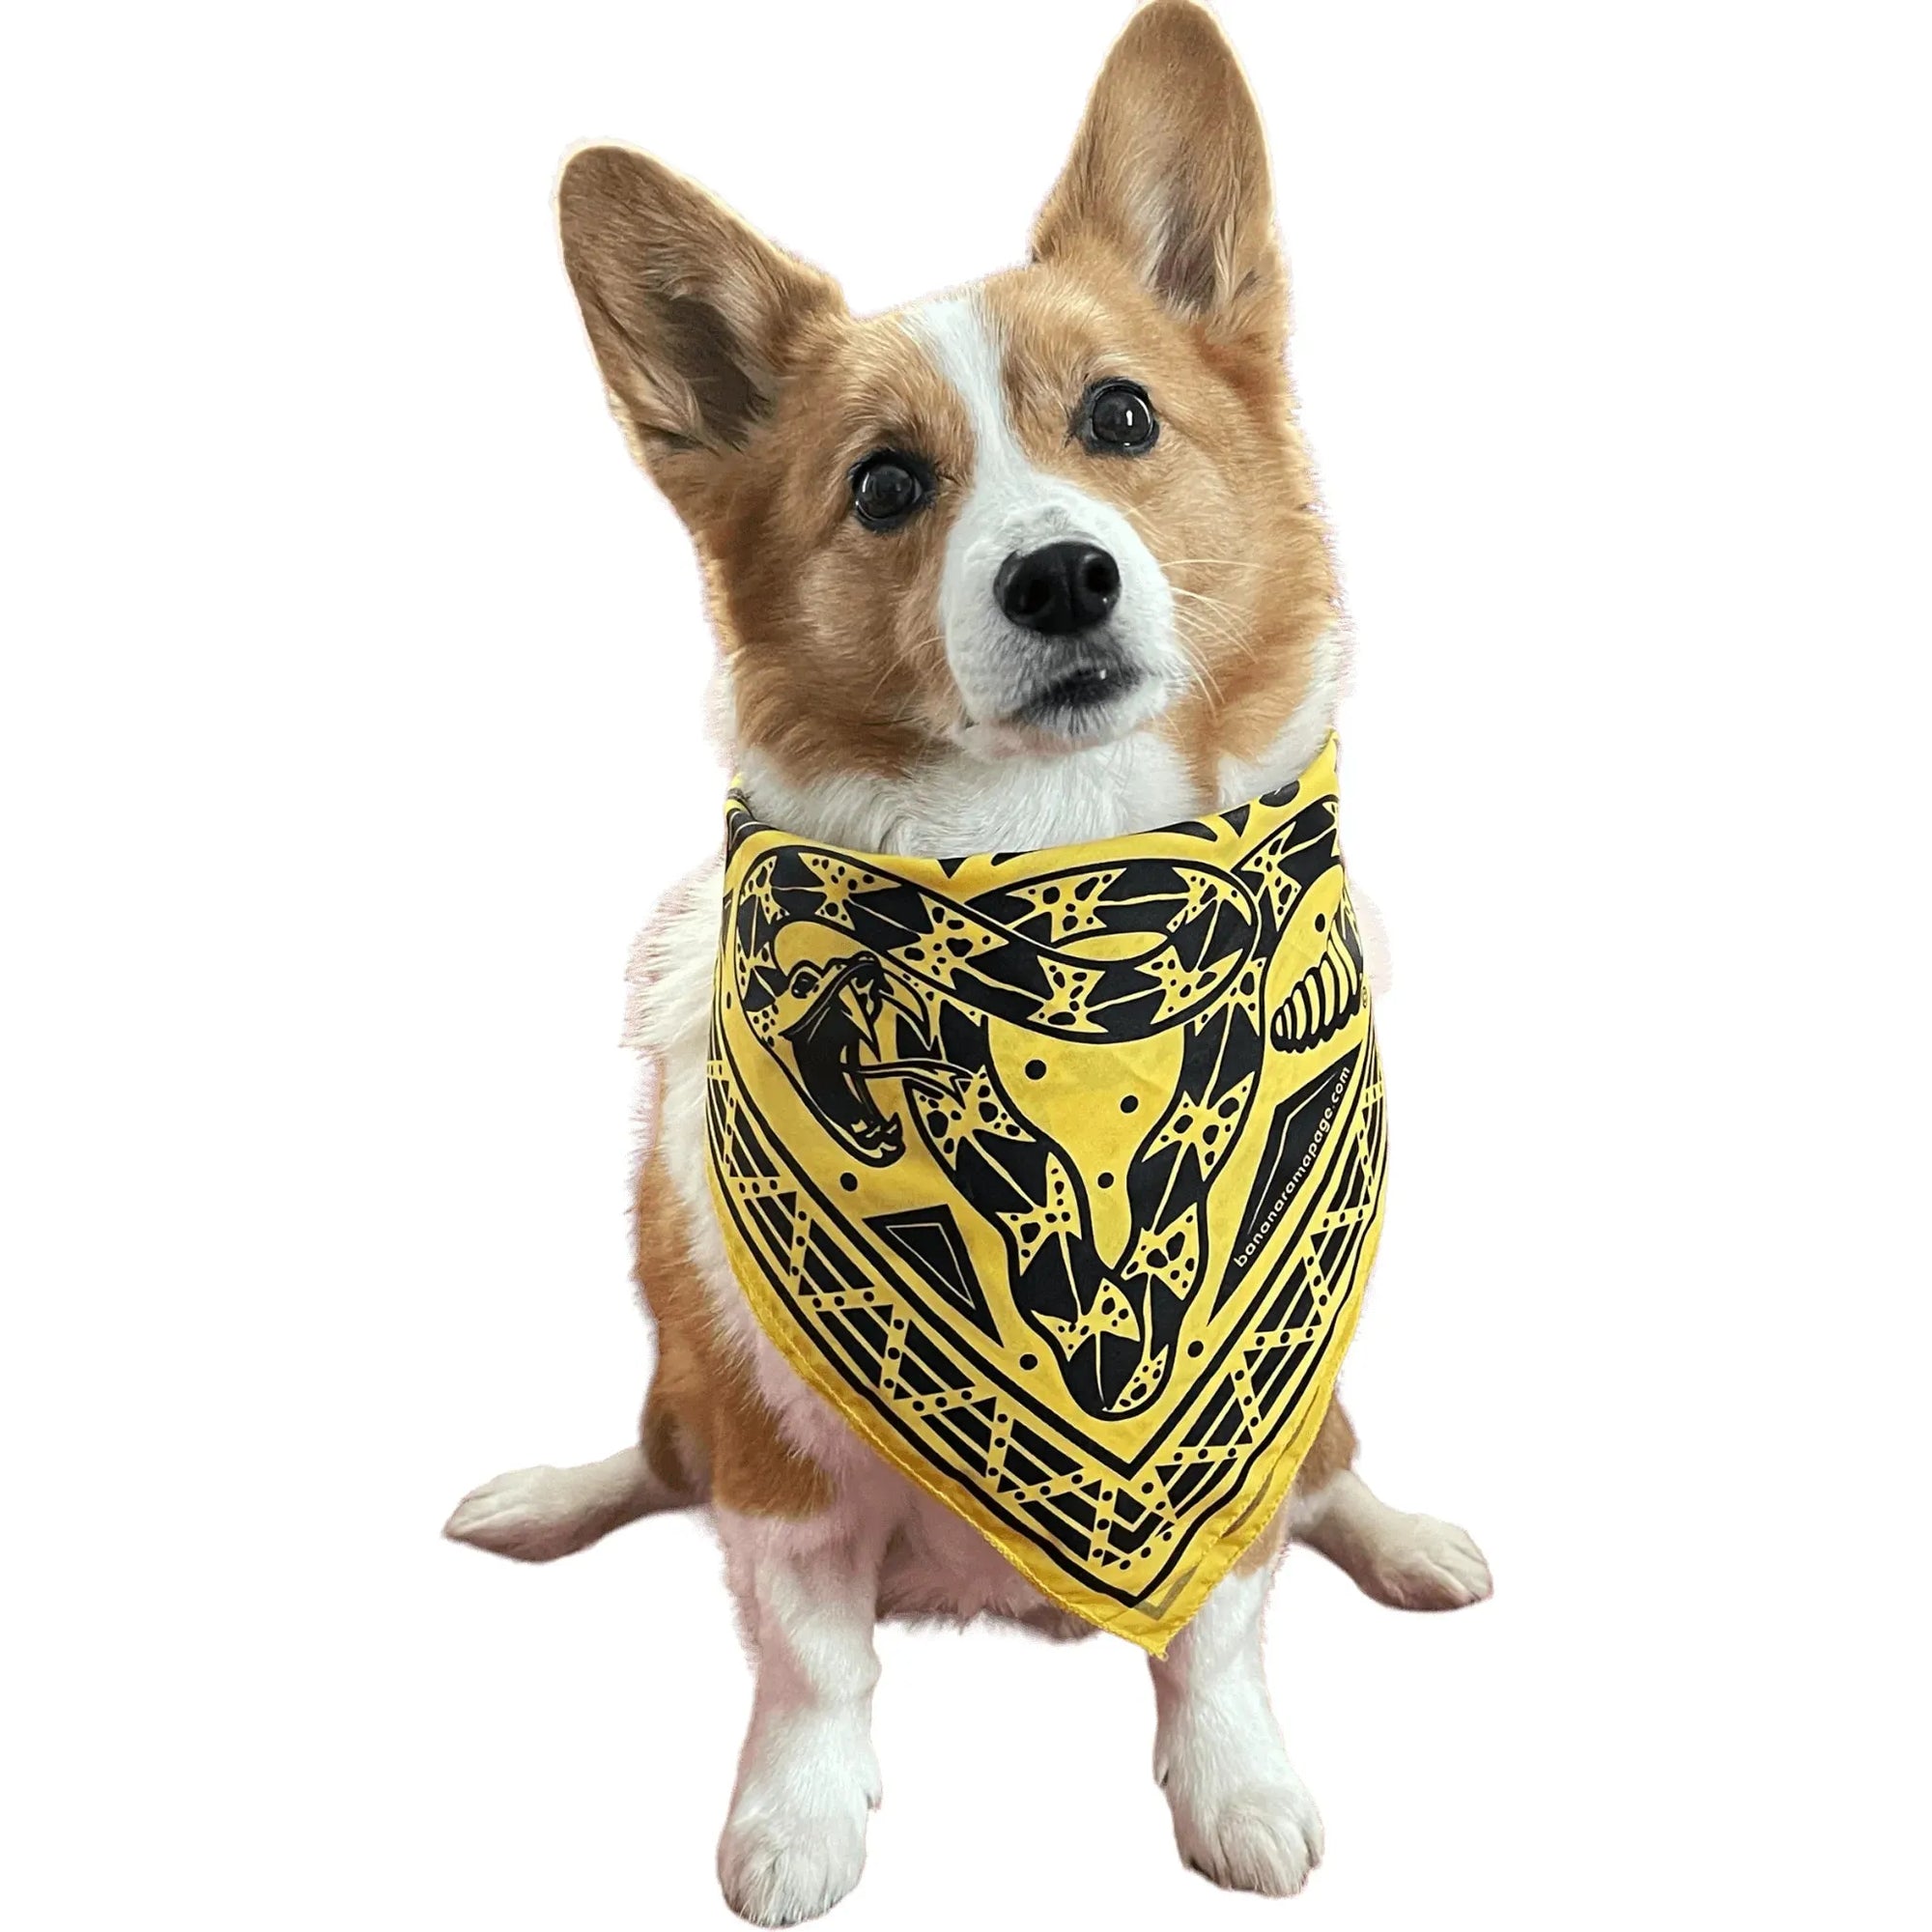 Don’t Tread On Me uterus pro choice bandana by anne lesniak exclusively available at Rebel Girl Rampage. Small batch, limited edition item. 100% cotton, made in the USA. The perfect dog or human bandana to support pro choice women’s rights abortion access